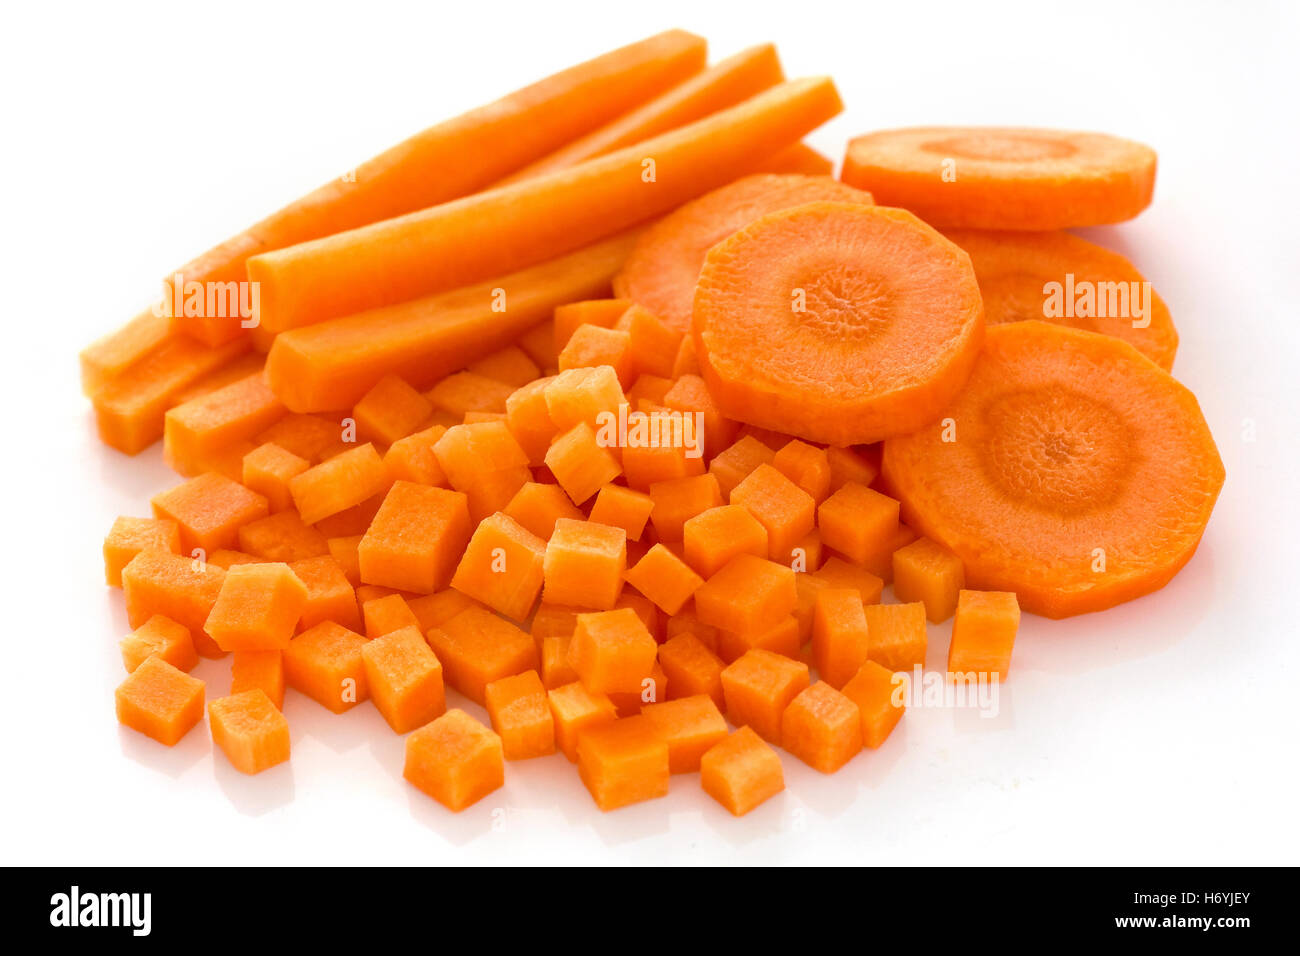 Carrots sliced and diced Stock Photo